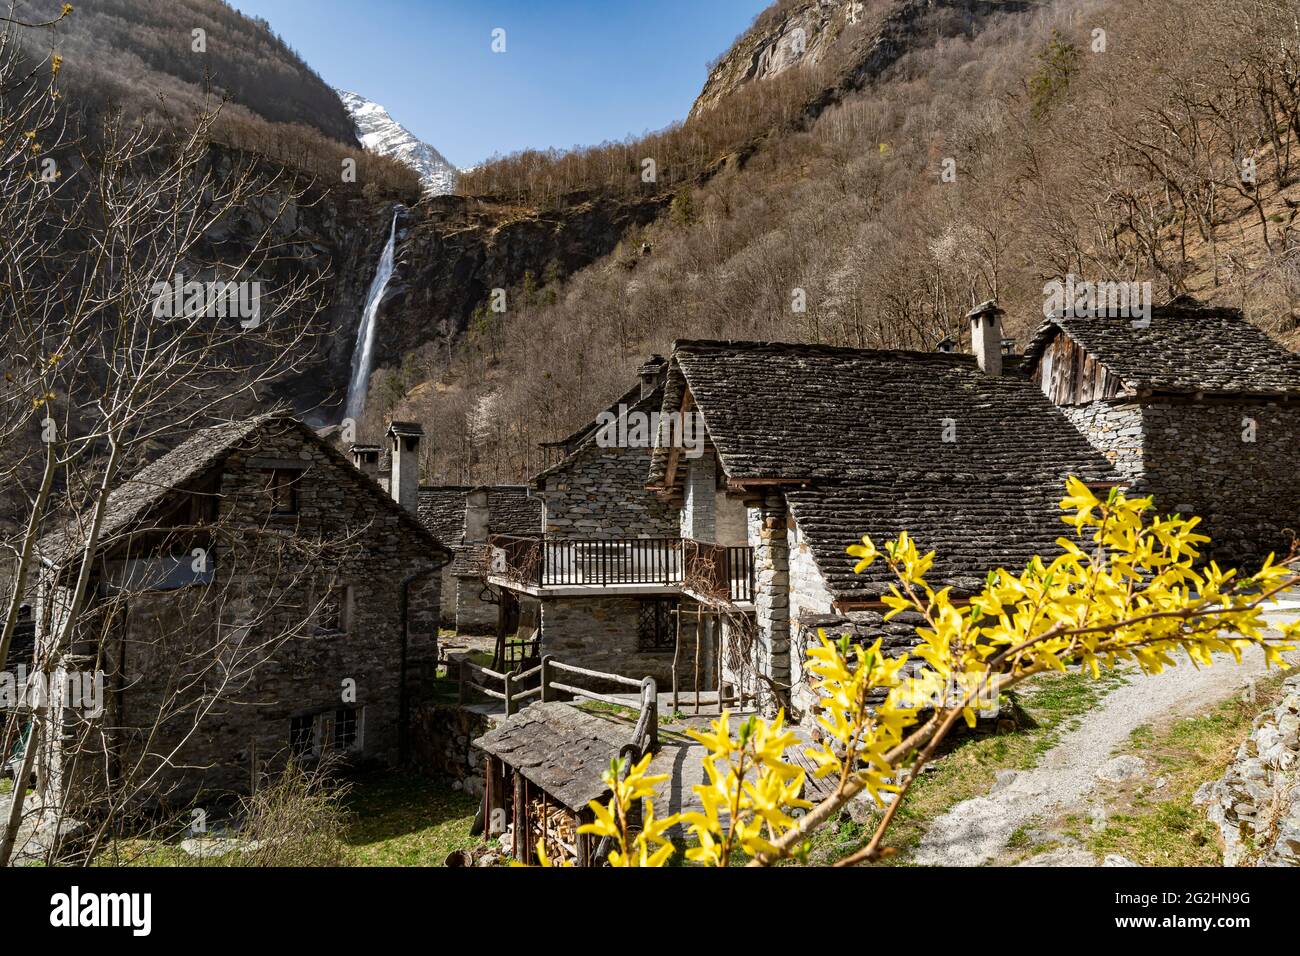 Foroglio is a well-preserved stone village in the upper Baona valley in the Maggia Valley. The beautiful stone houses are dominated by the 110m high waterfall, the Cascata di Foroglio. Stock Photo